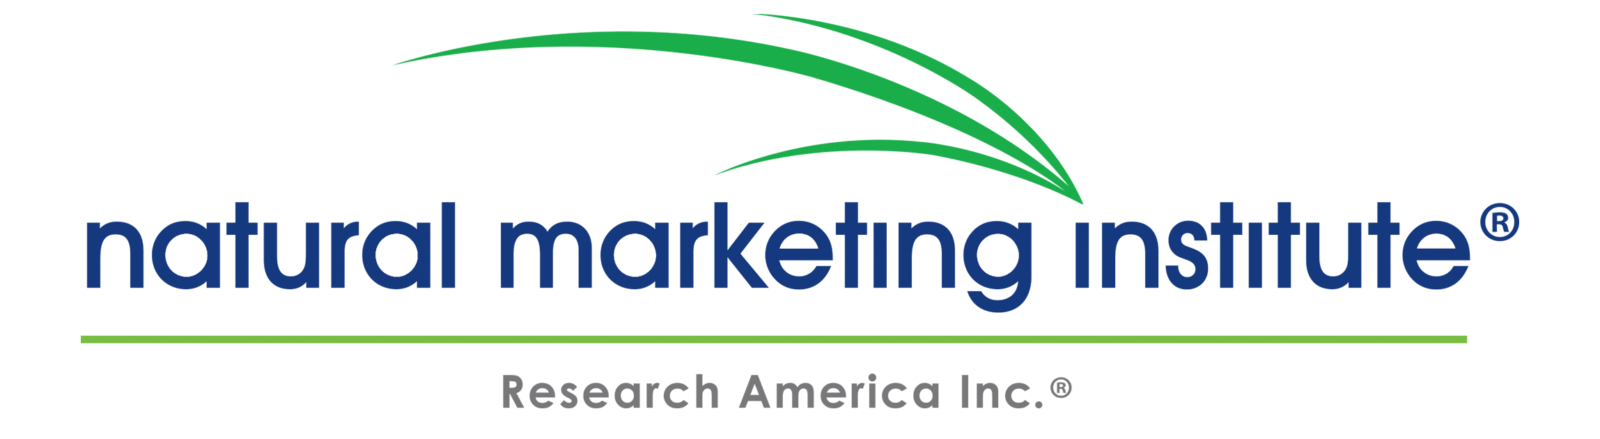 Market Research Outsourcing